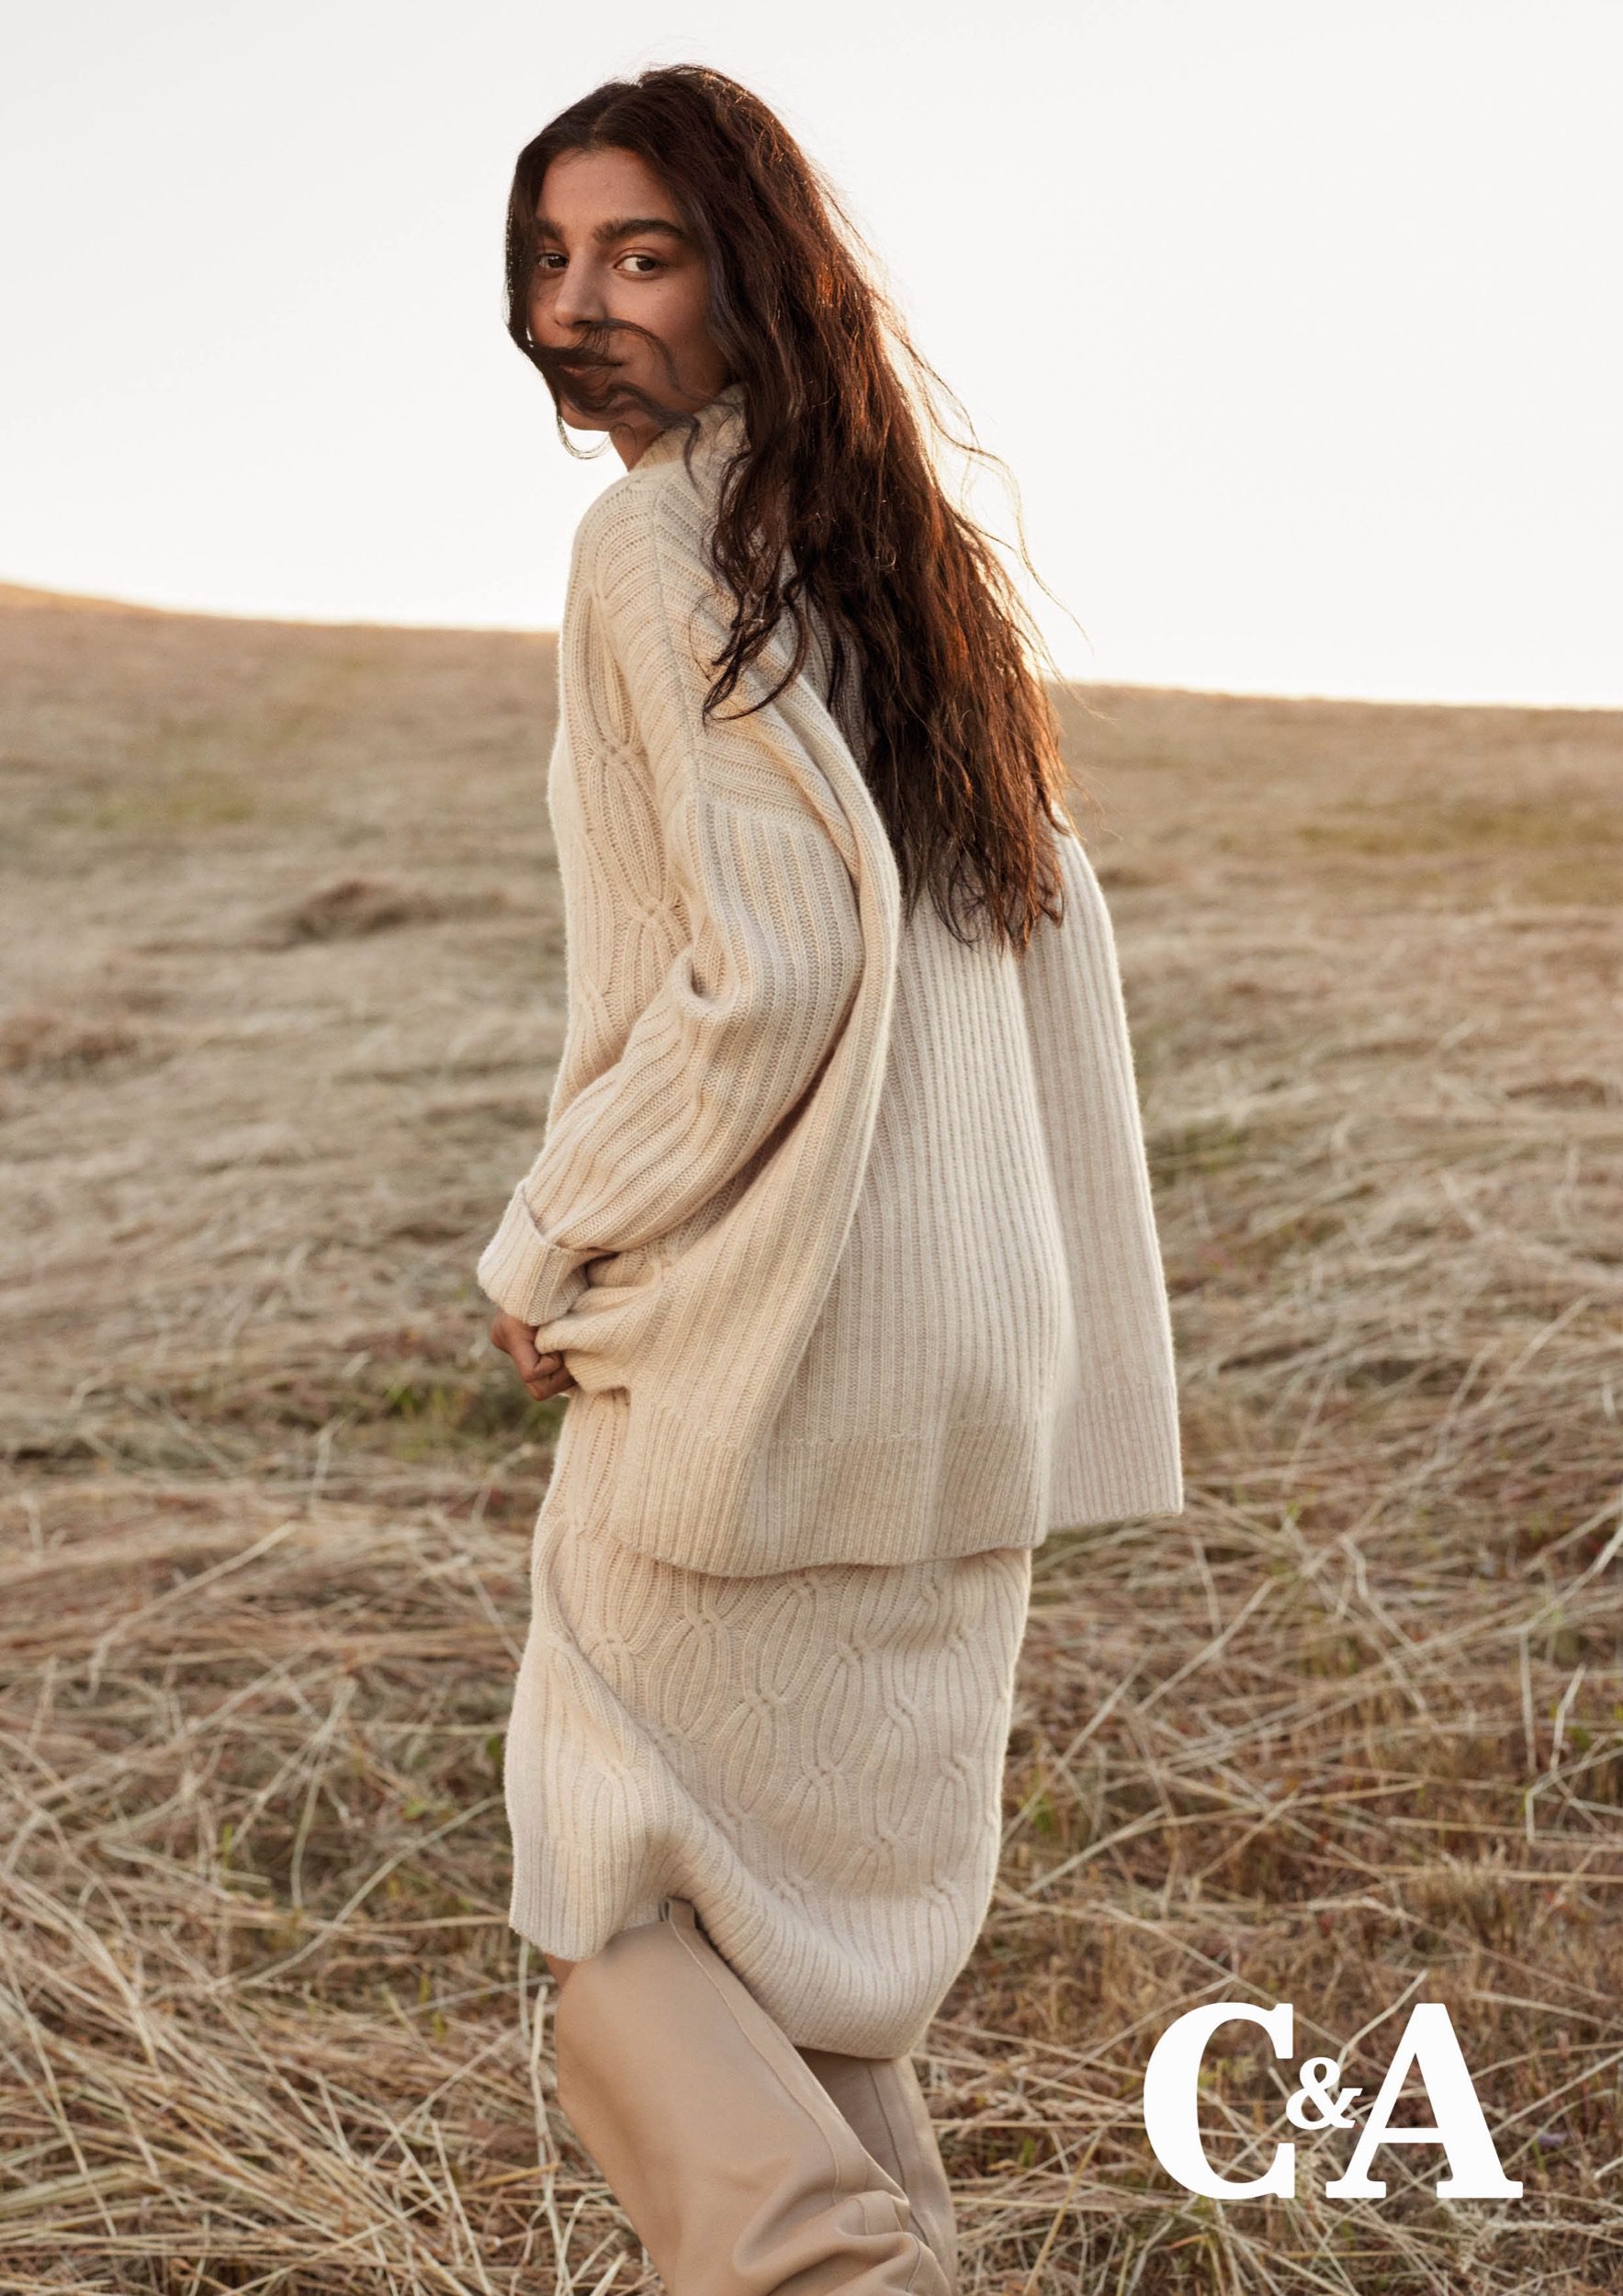 kathrin-hohberg-ca-cashmere-knitwear-f22-magnus-magnusson-01